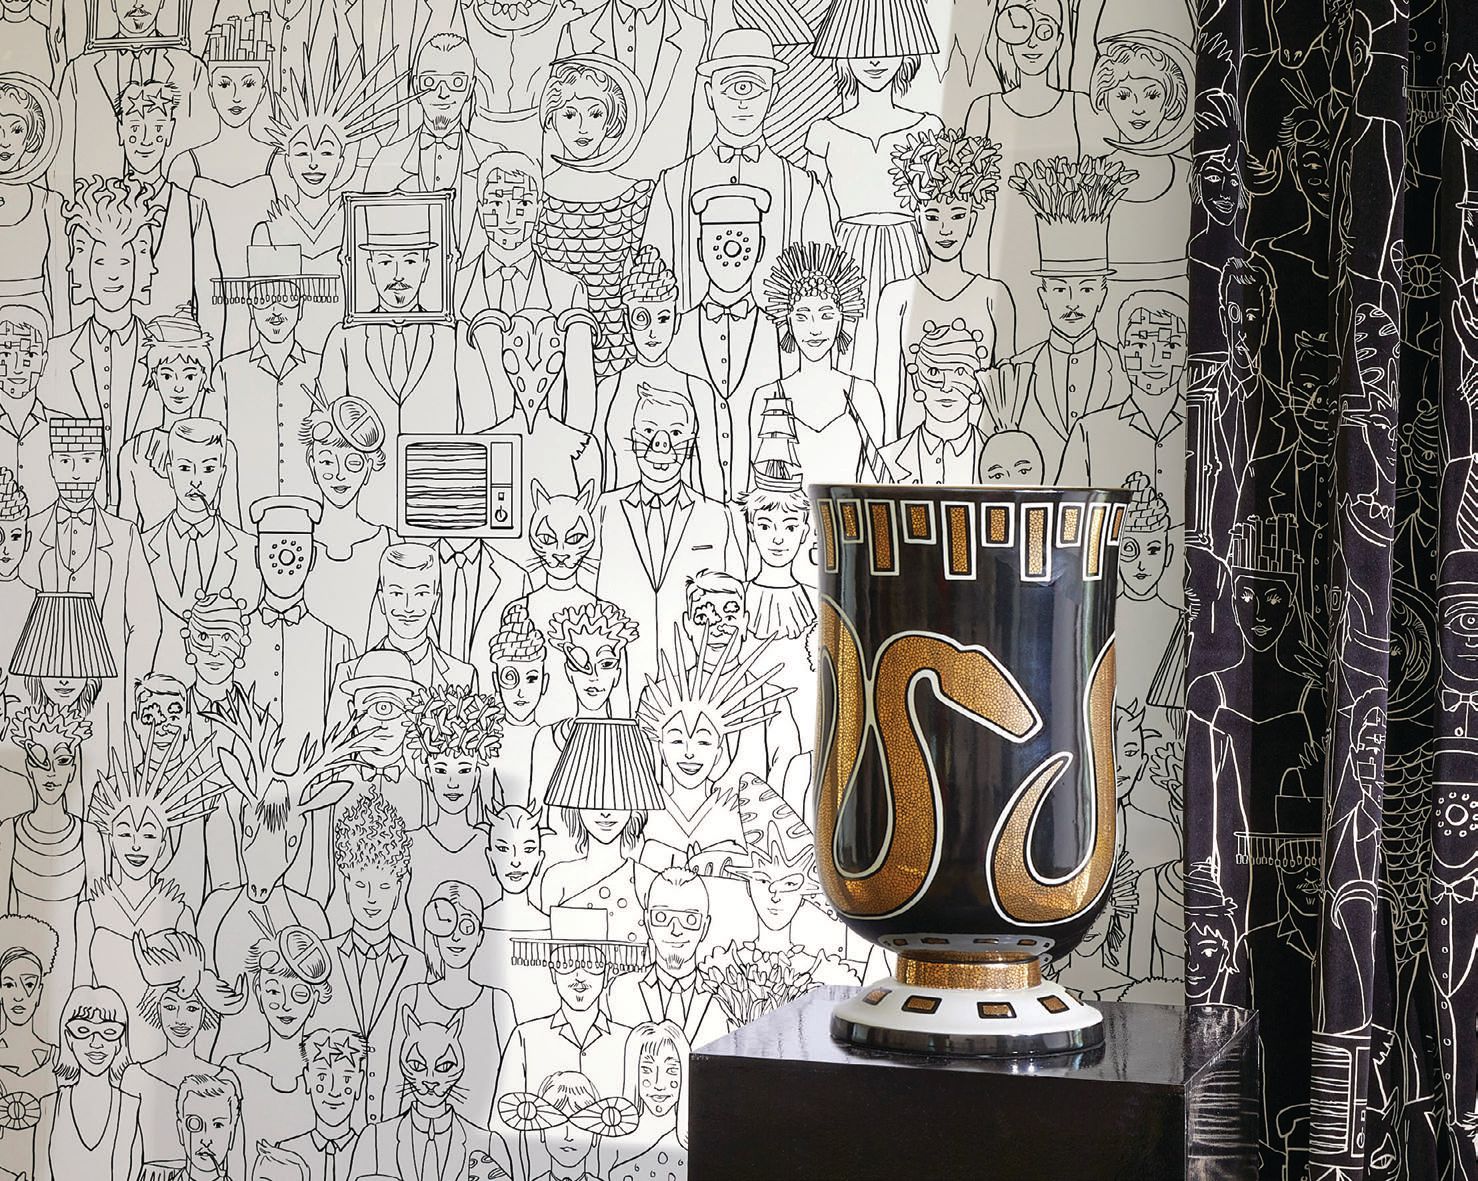 Fulk says the wallpaper collection was meant to be whimsical and optimistic. PRODUCT PHOTO COURTESY OF PIERRE FREY